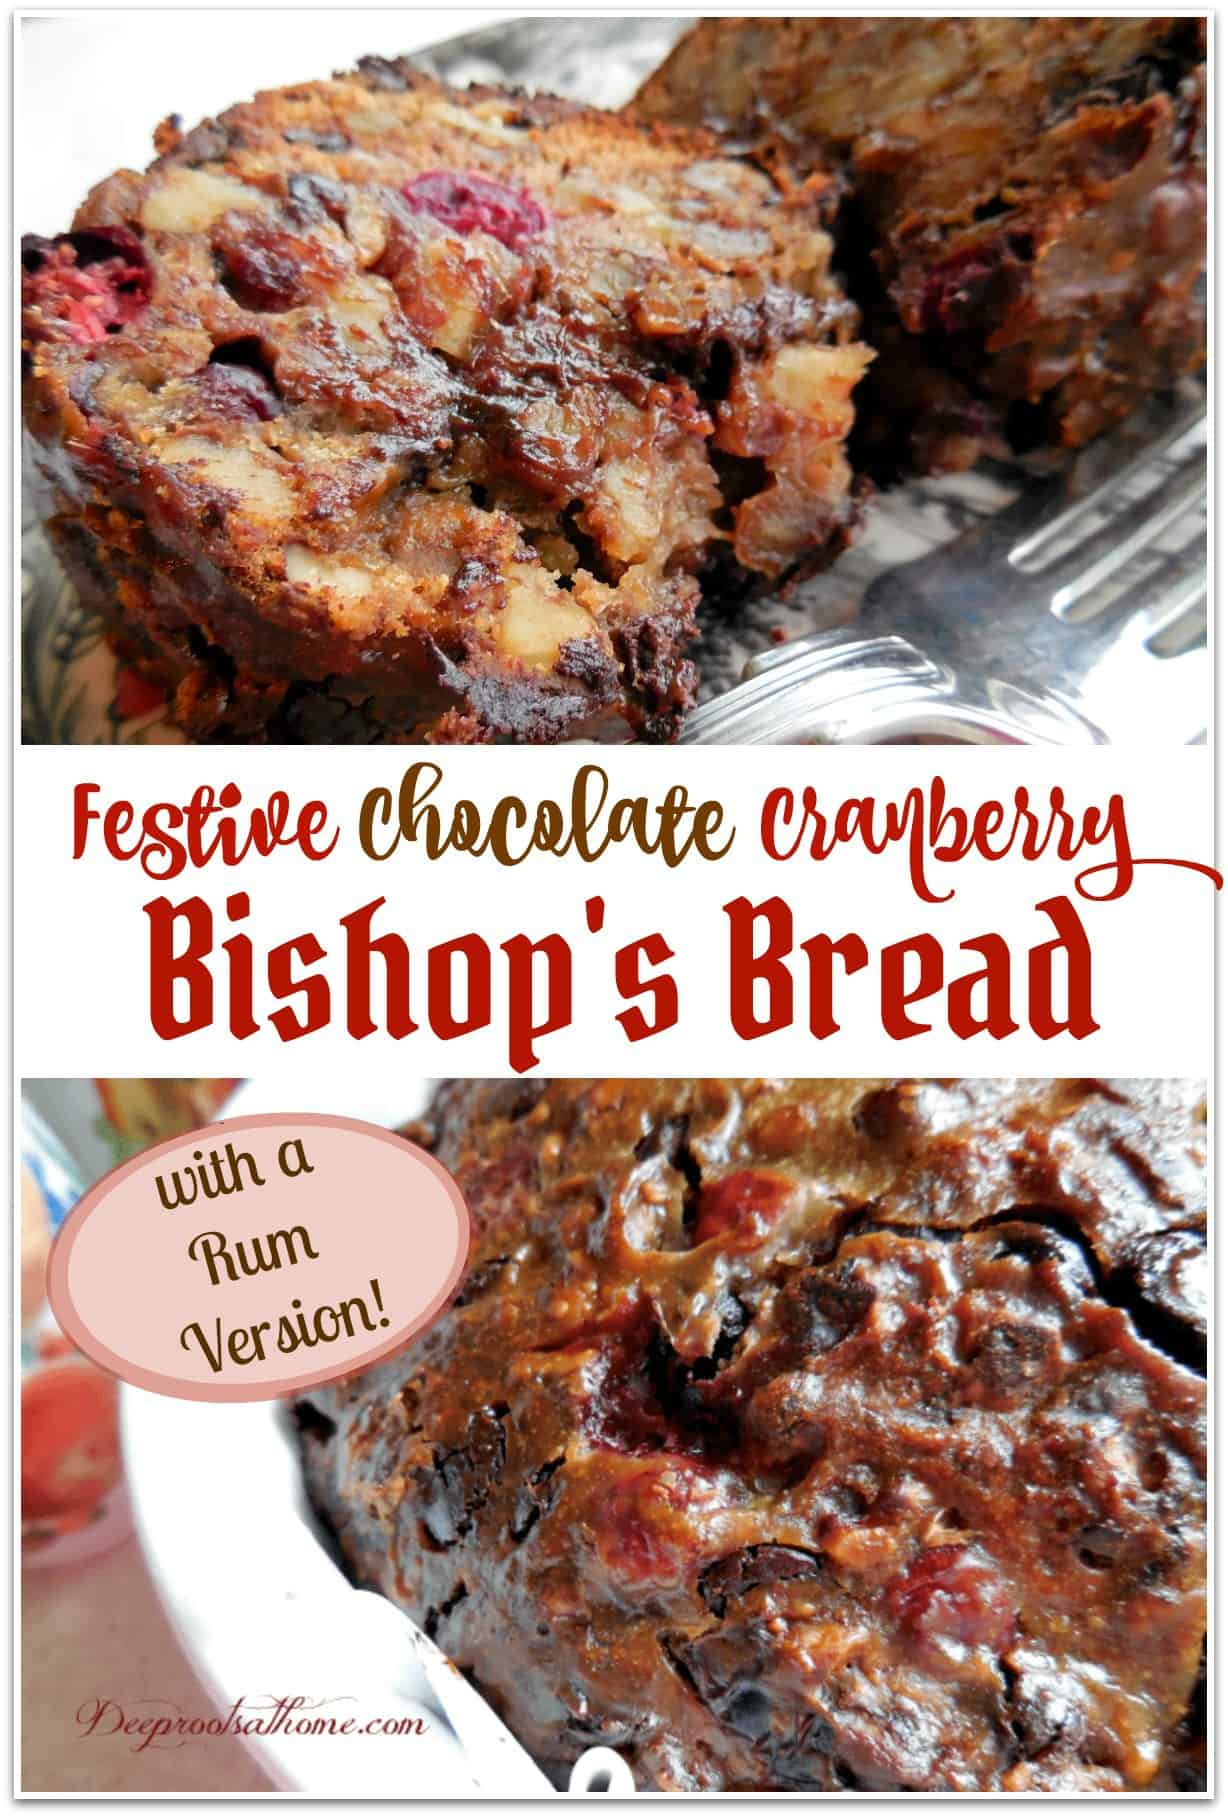 Mama's Festive Chocolate Cranberry Bishop's Bread with Rum Version. A holiday dessert